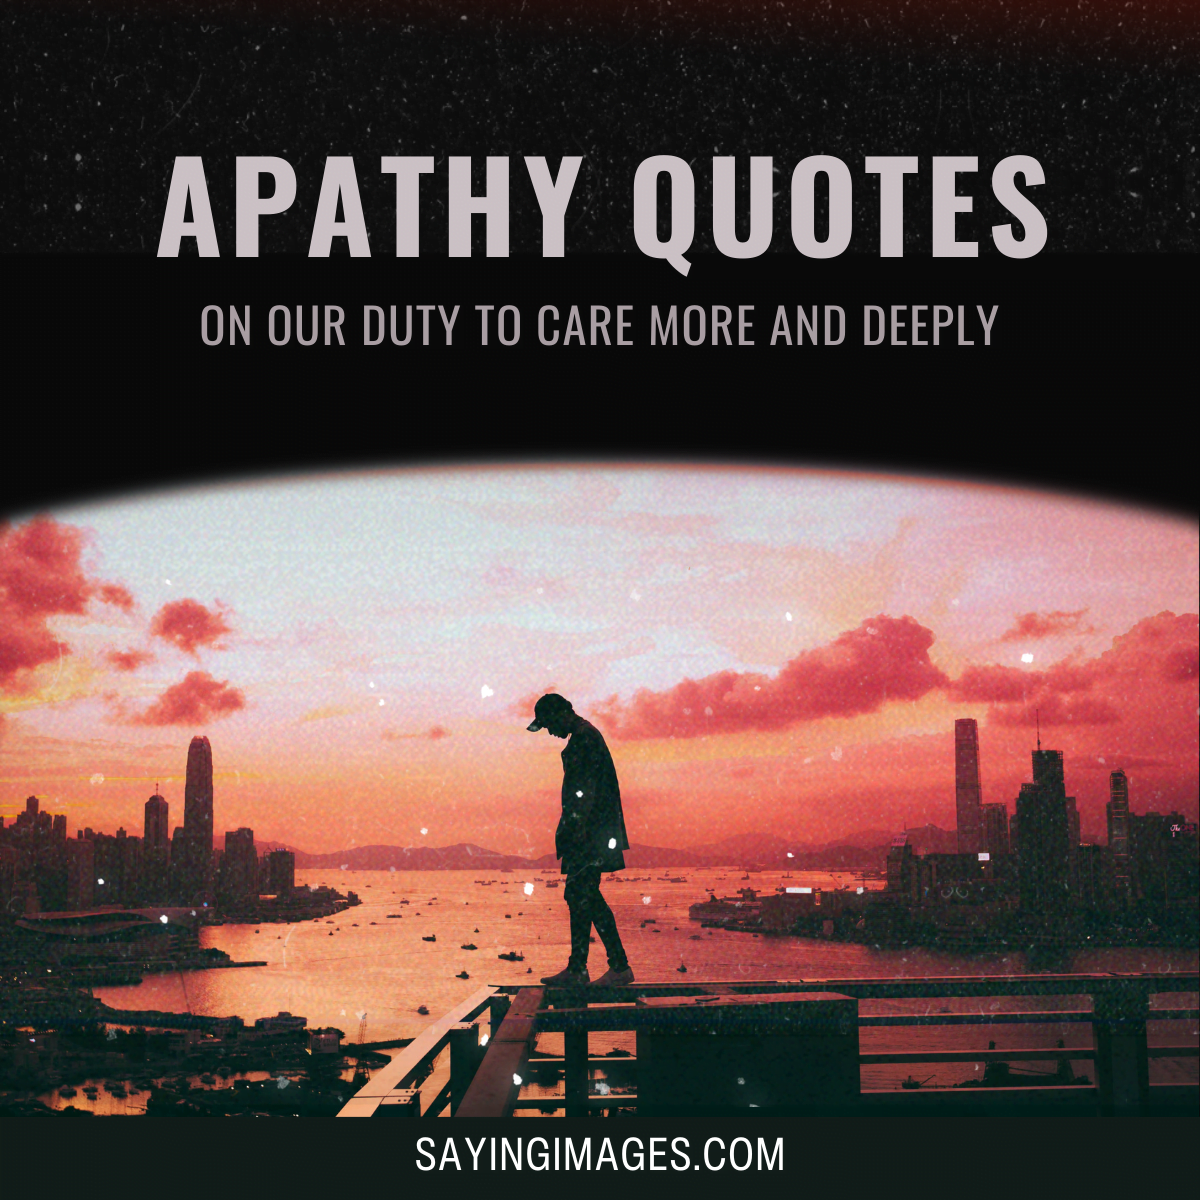 Apathy quotes